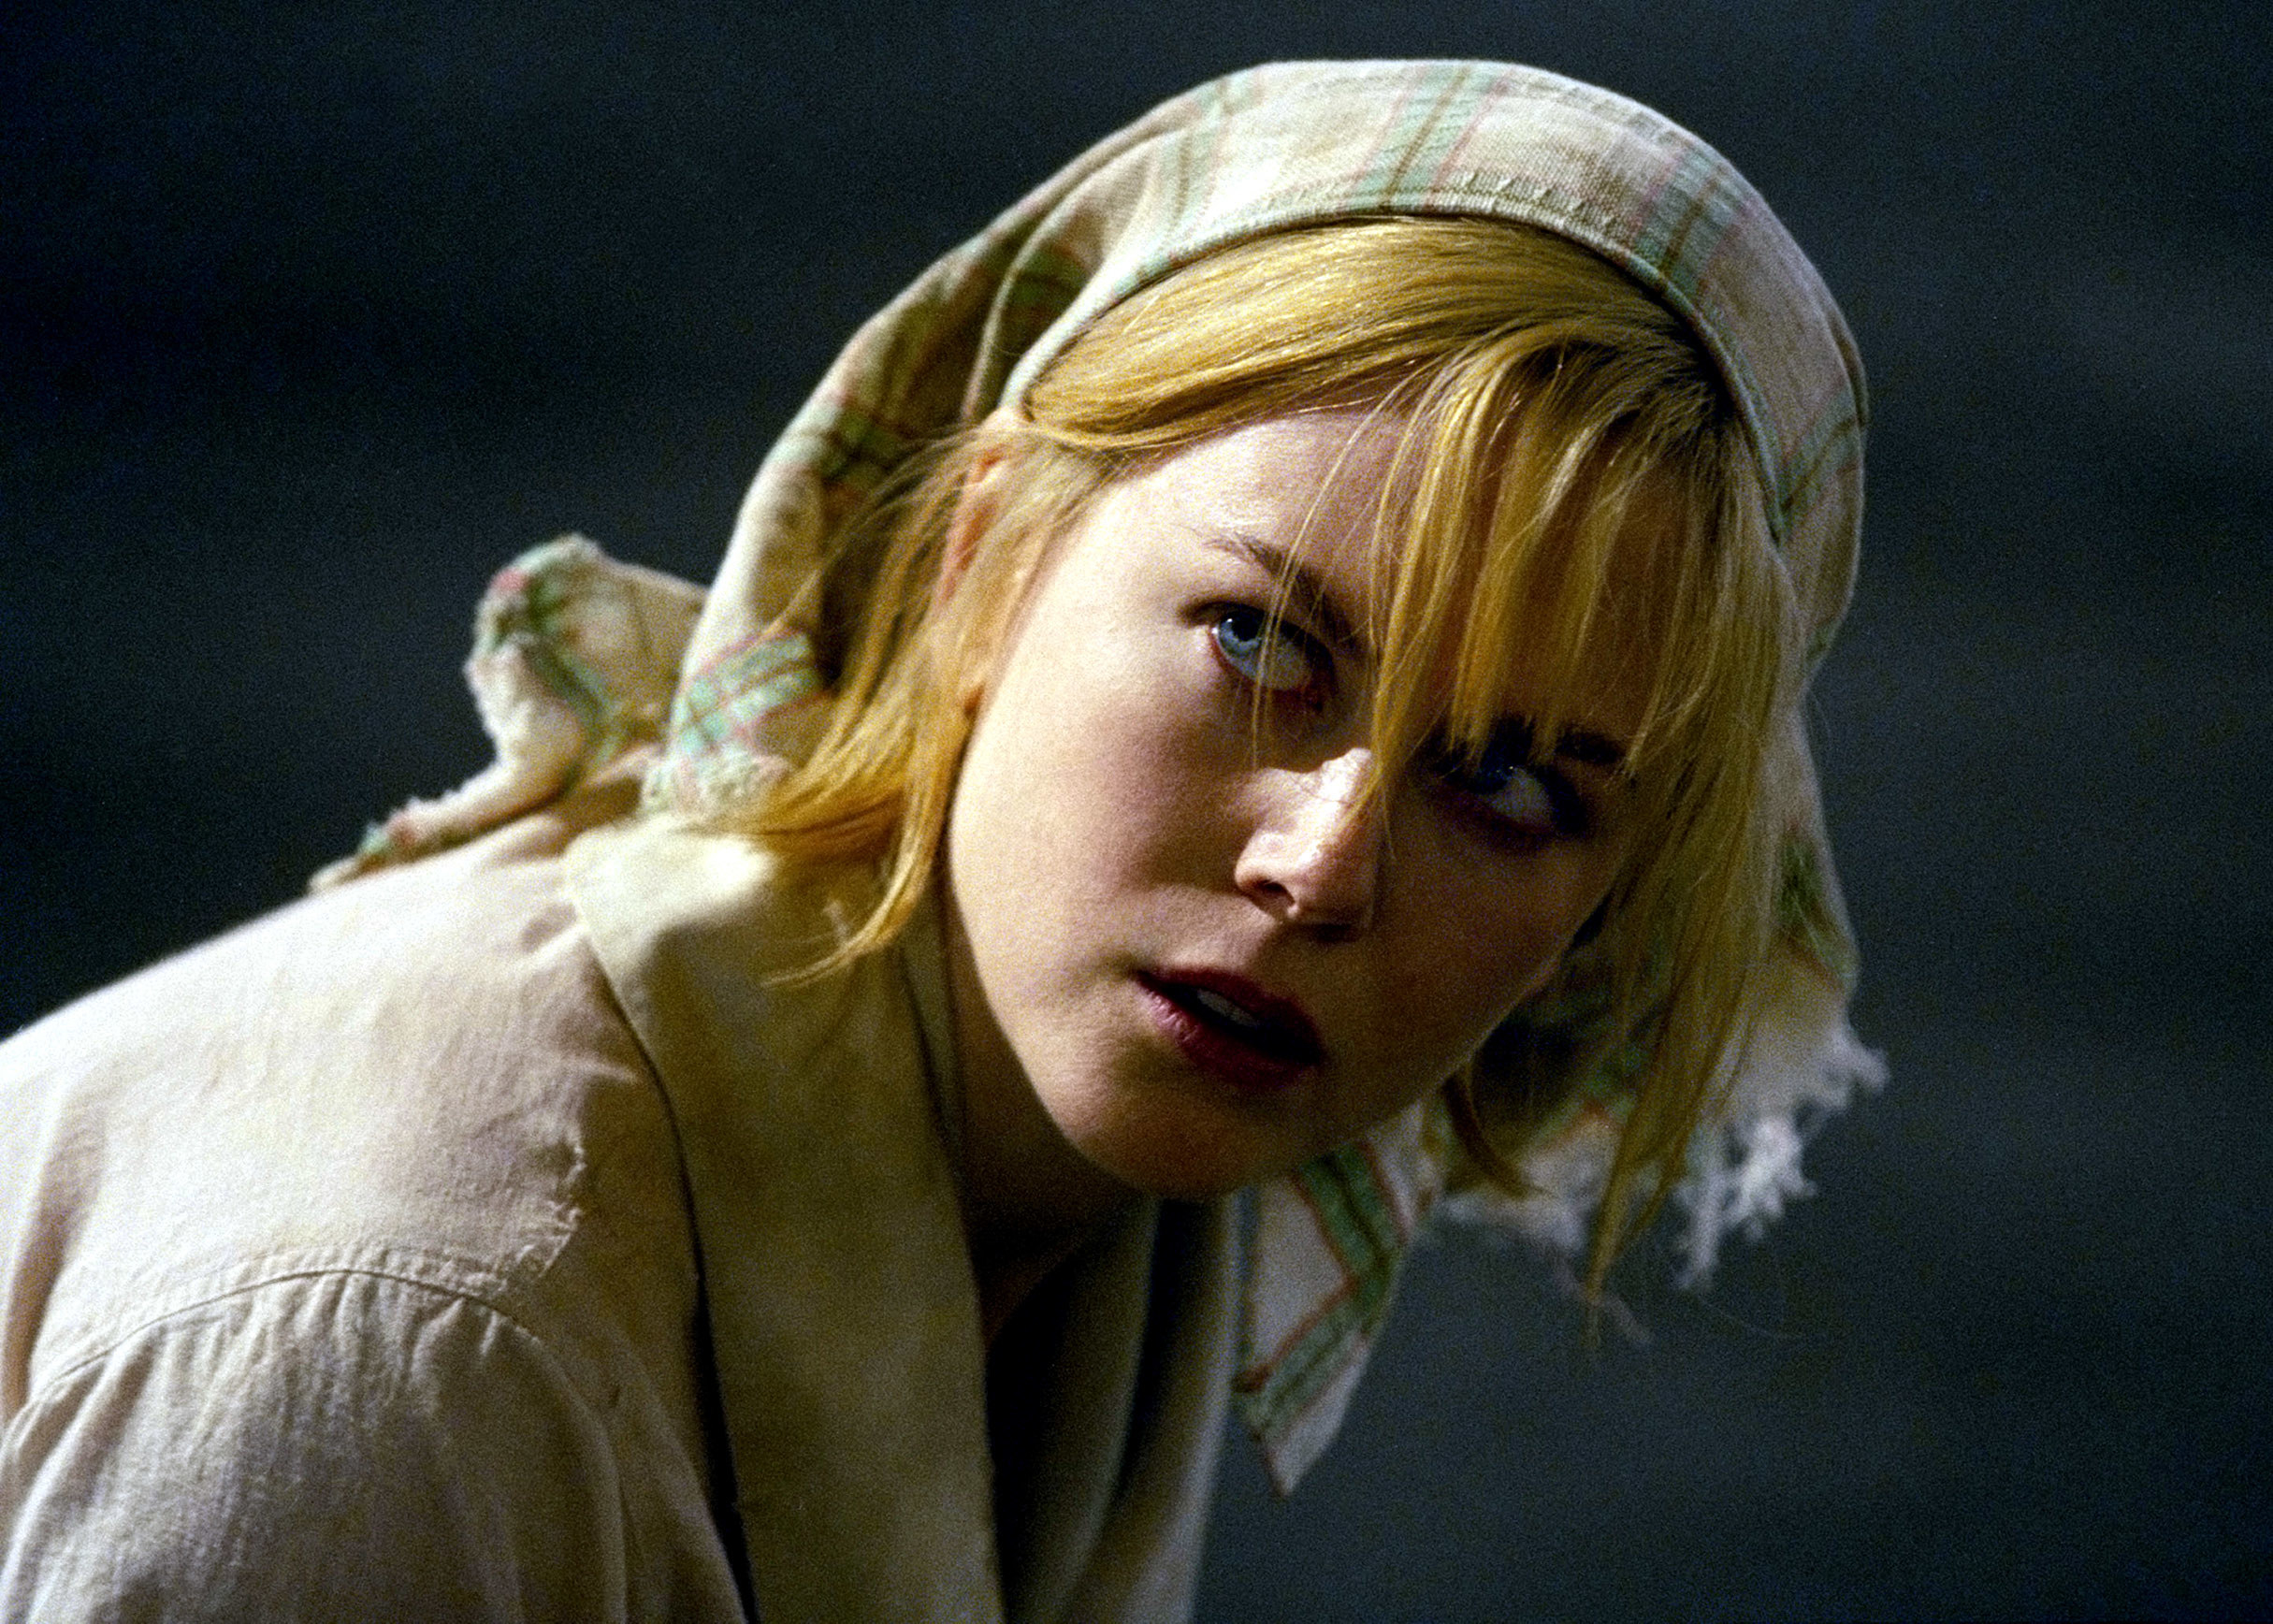 Nicole Kidman in raggedy clothes looking up in fear